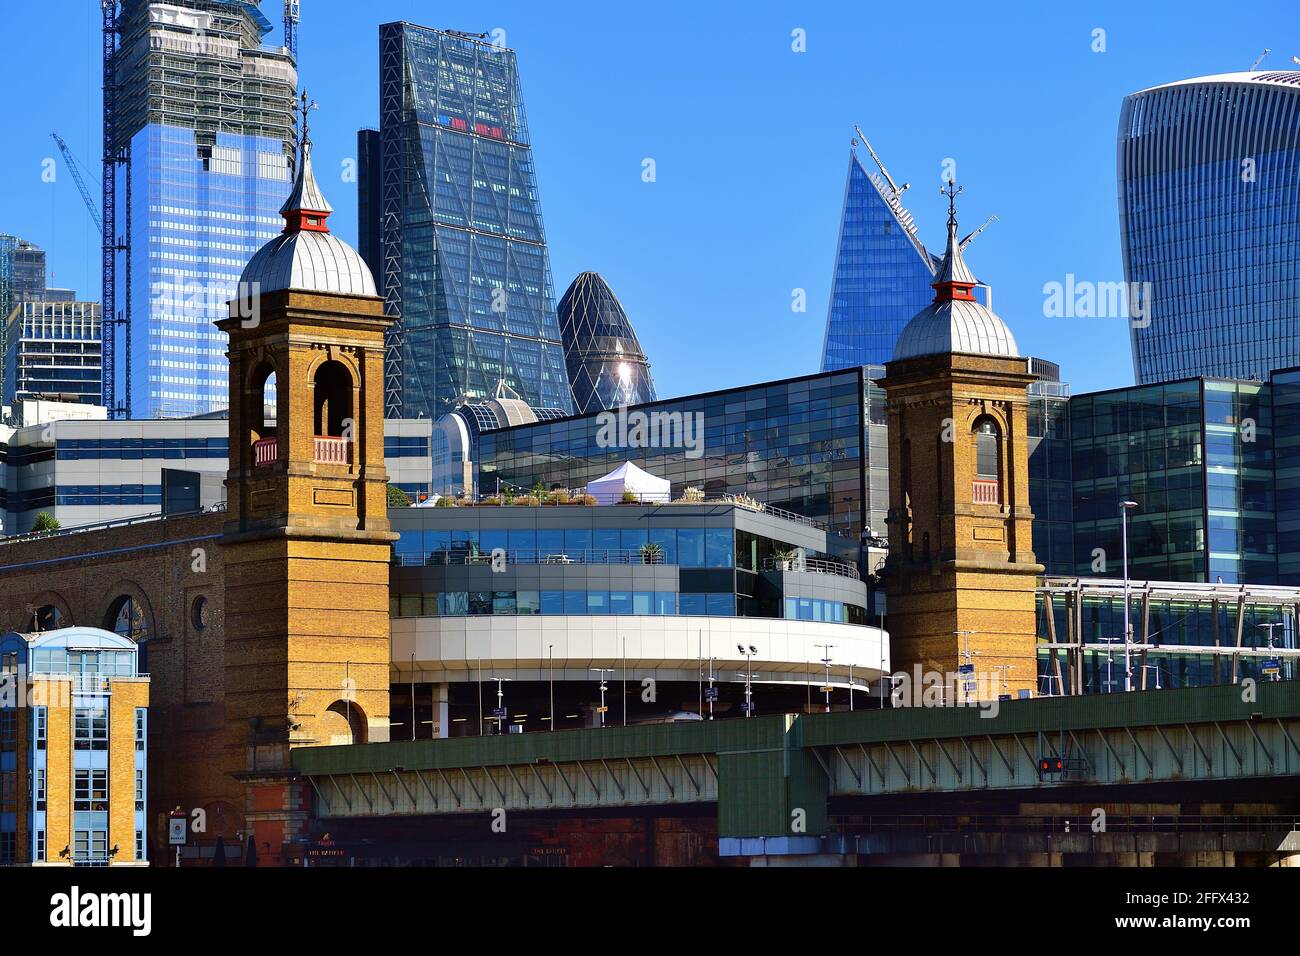 London, England, United Kingdom. A fast expanding skyline was apparent in the City of London and the financial district as seen in this image. Stock Photo